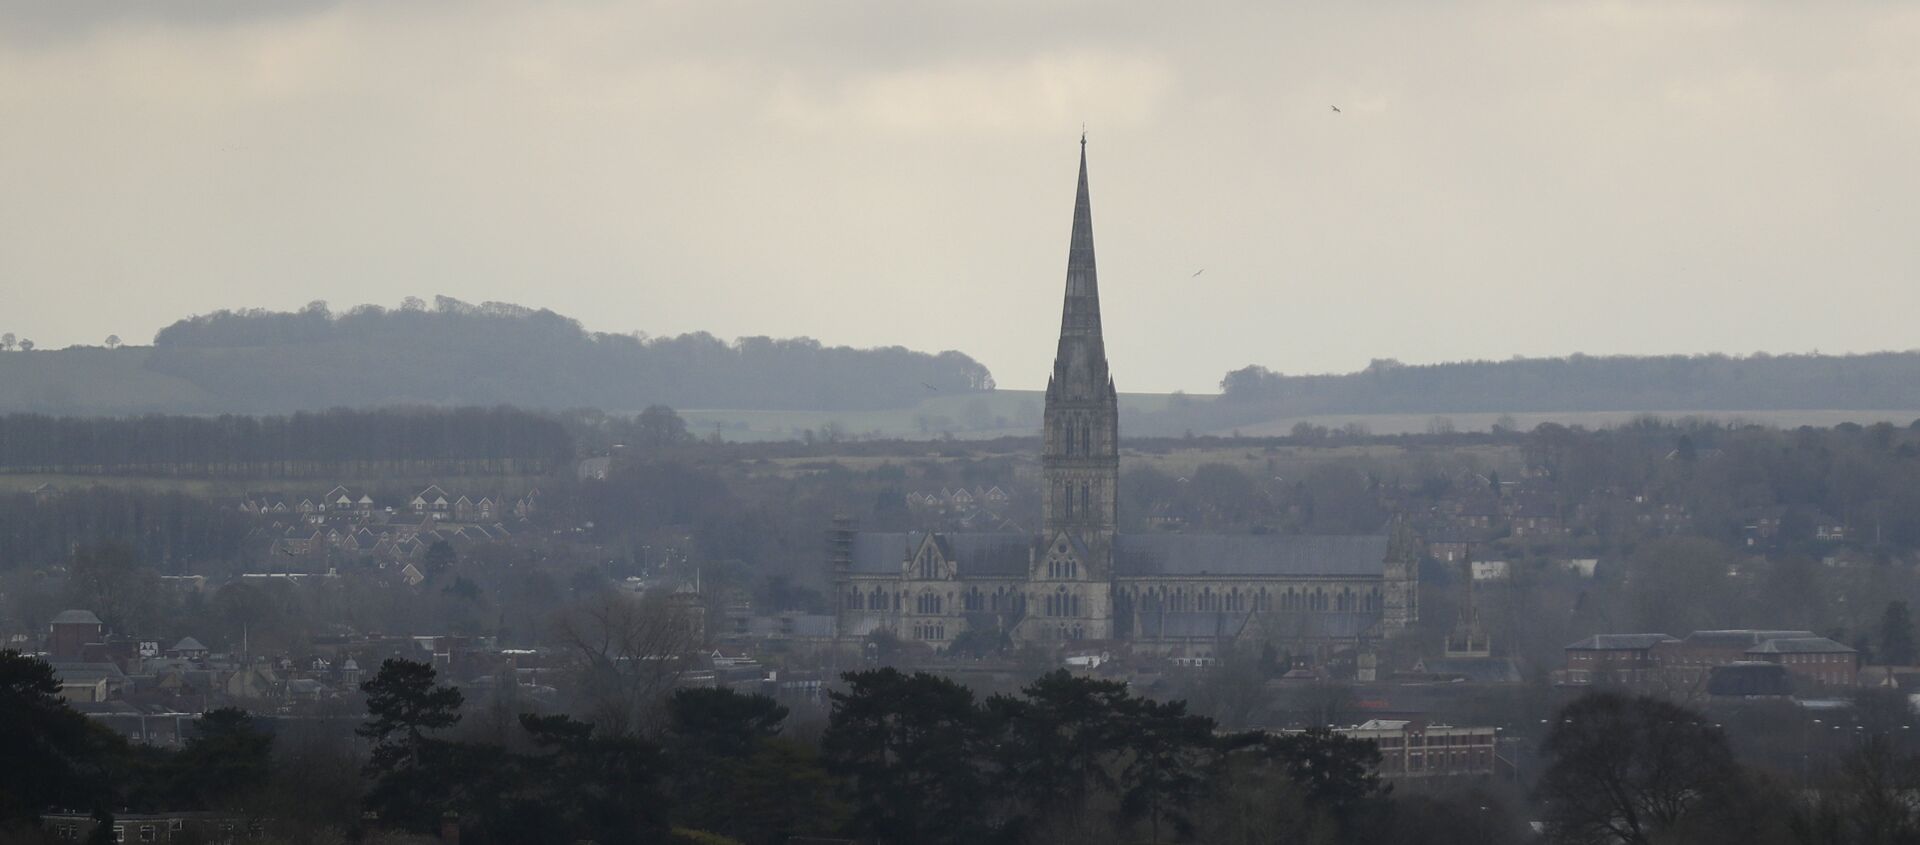 In this Tuesday, March 13, 2018 file photo the combined tower and spire of Salisbury Cathedral stand surrounded by the medieval city where former Russian double agent Sergei Skripal and his daughter were found critically ill following exposure to the Russian-developed nerve agent Novichok in Salisbury, England - Sputnik International, 1920, 04.03.2019